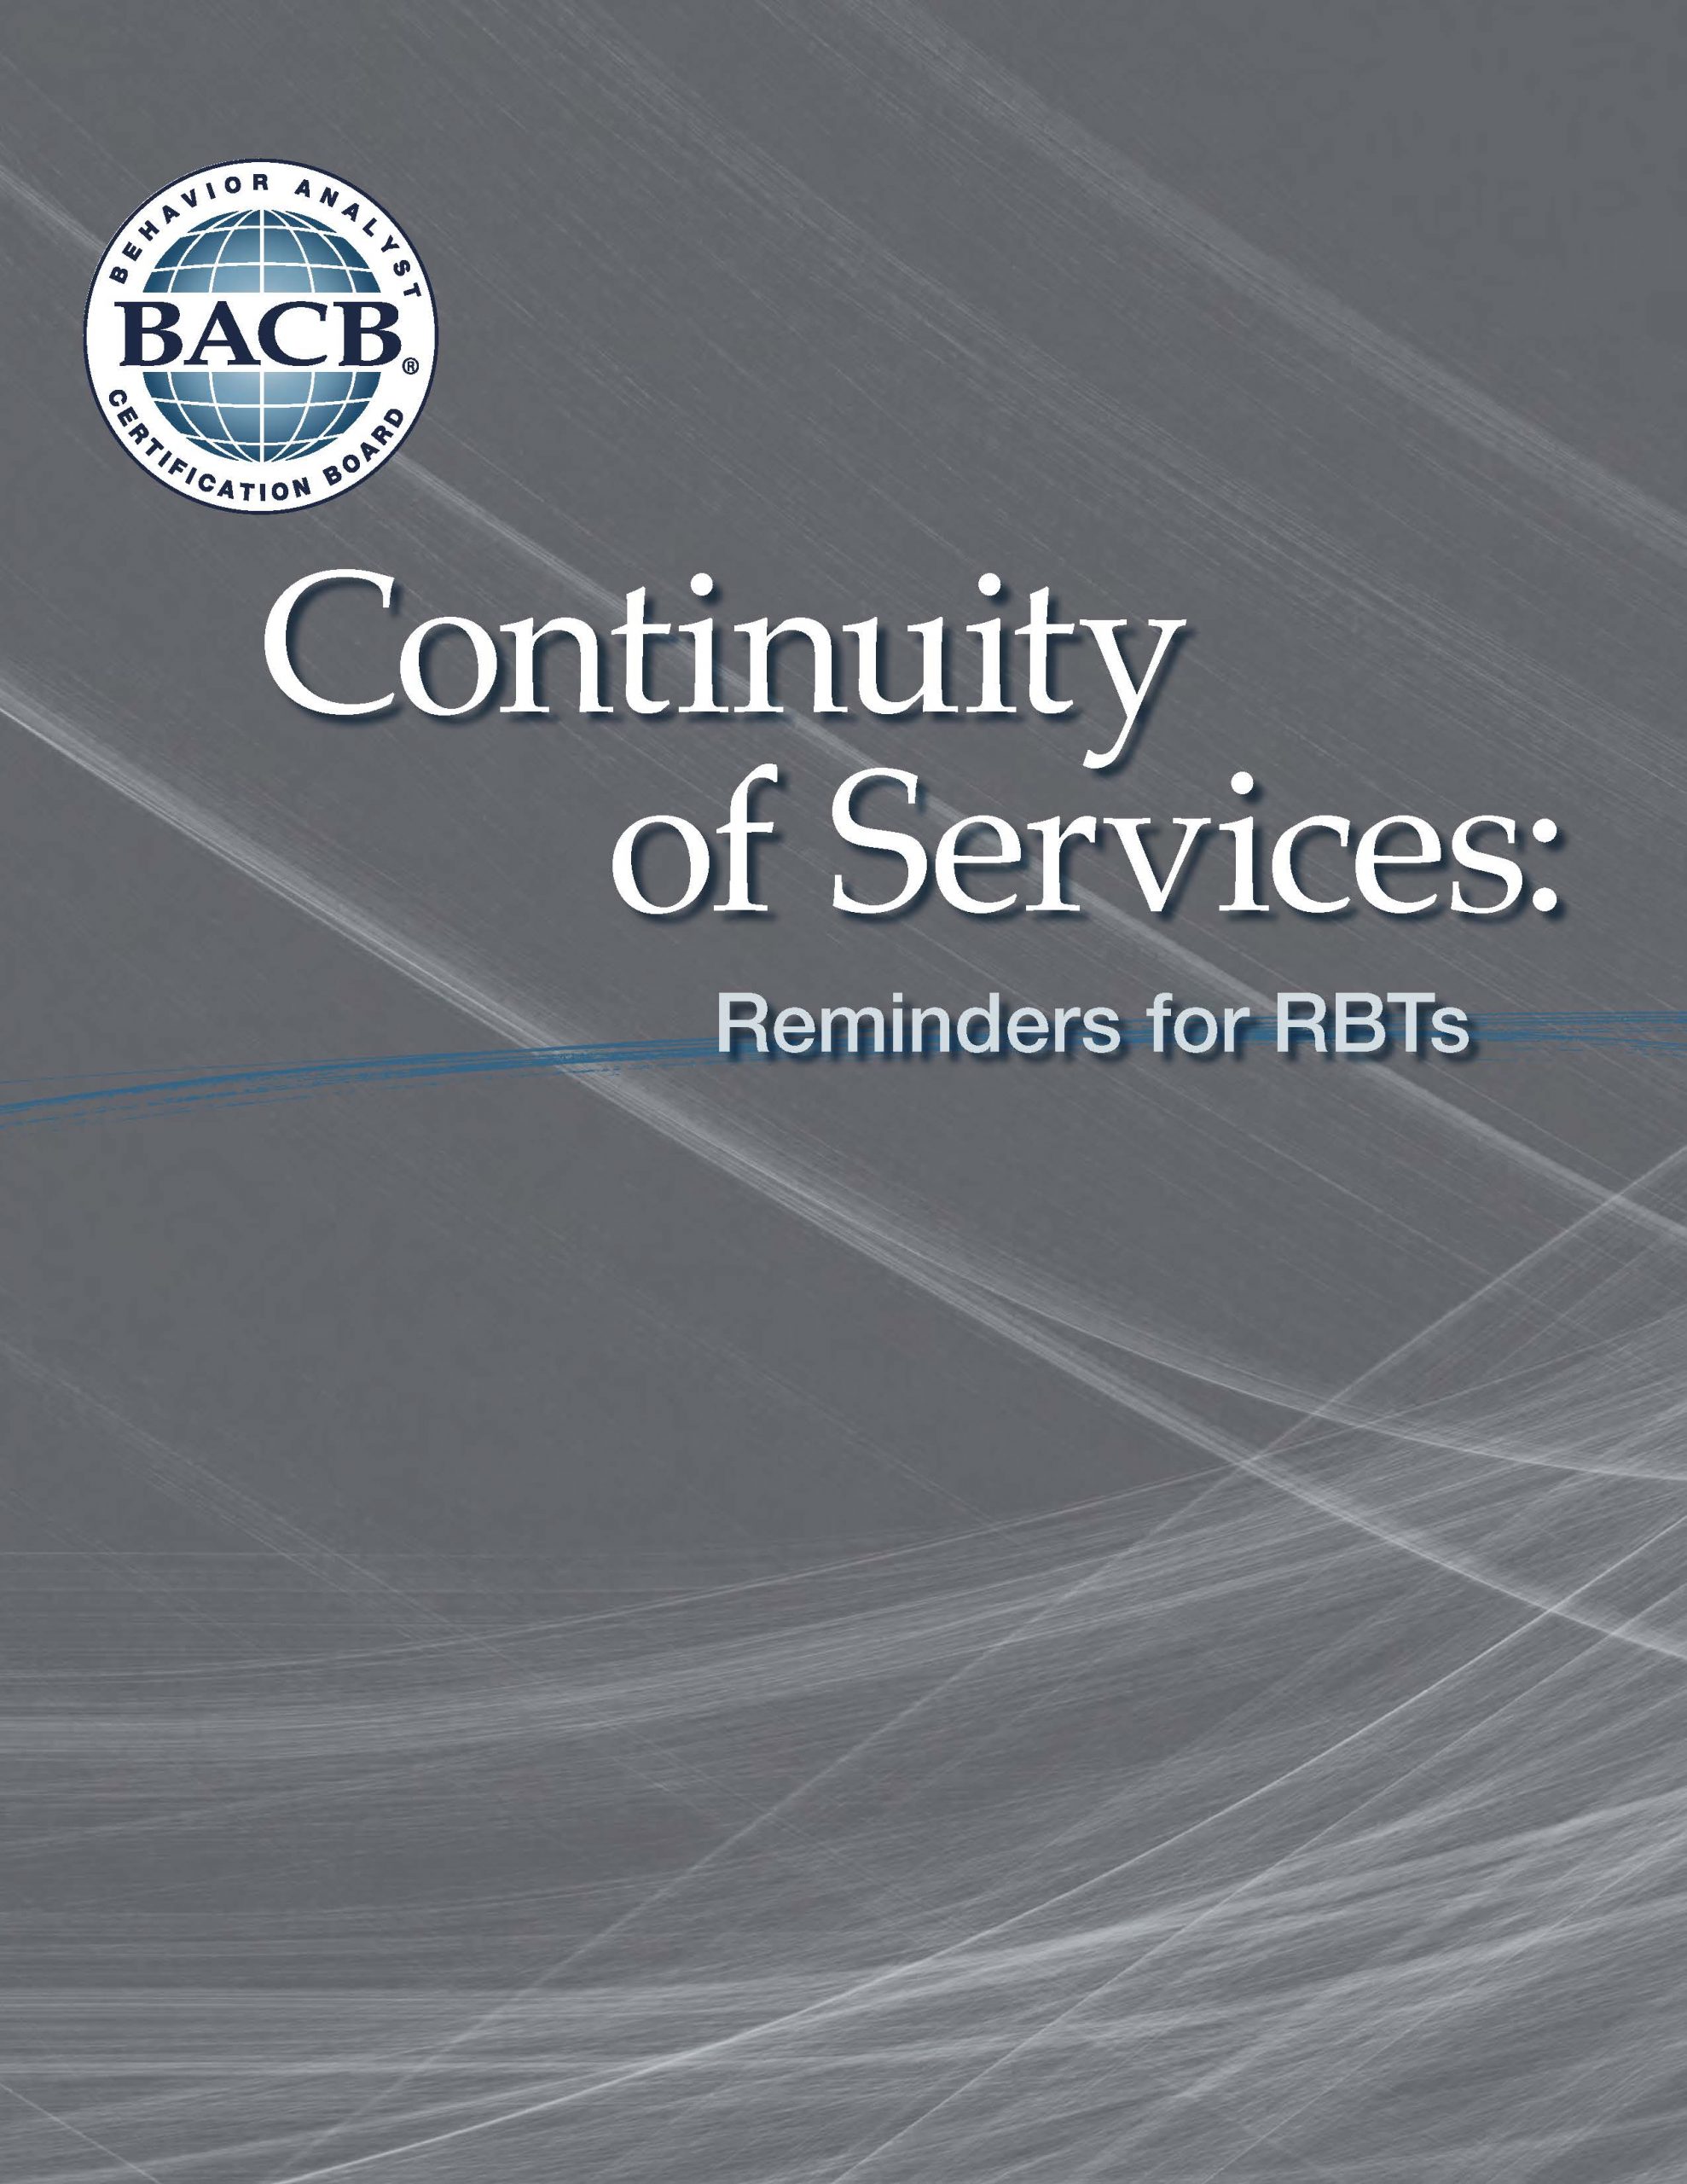 Continuity of Service: Reminder for RBTs